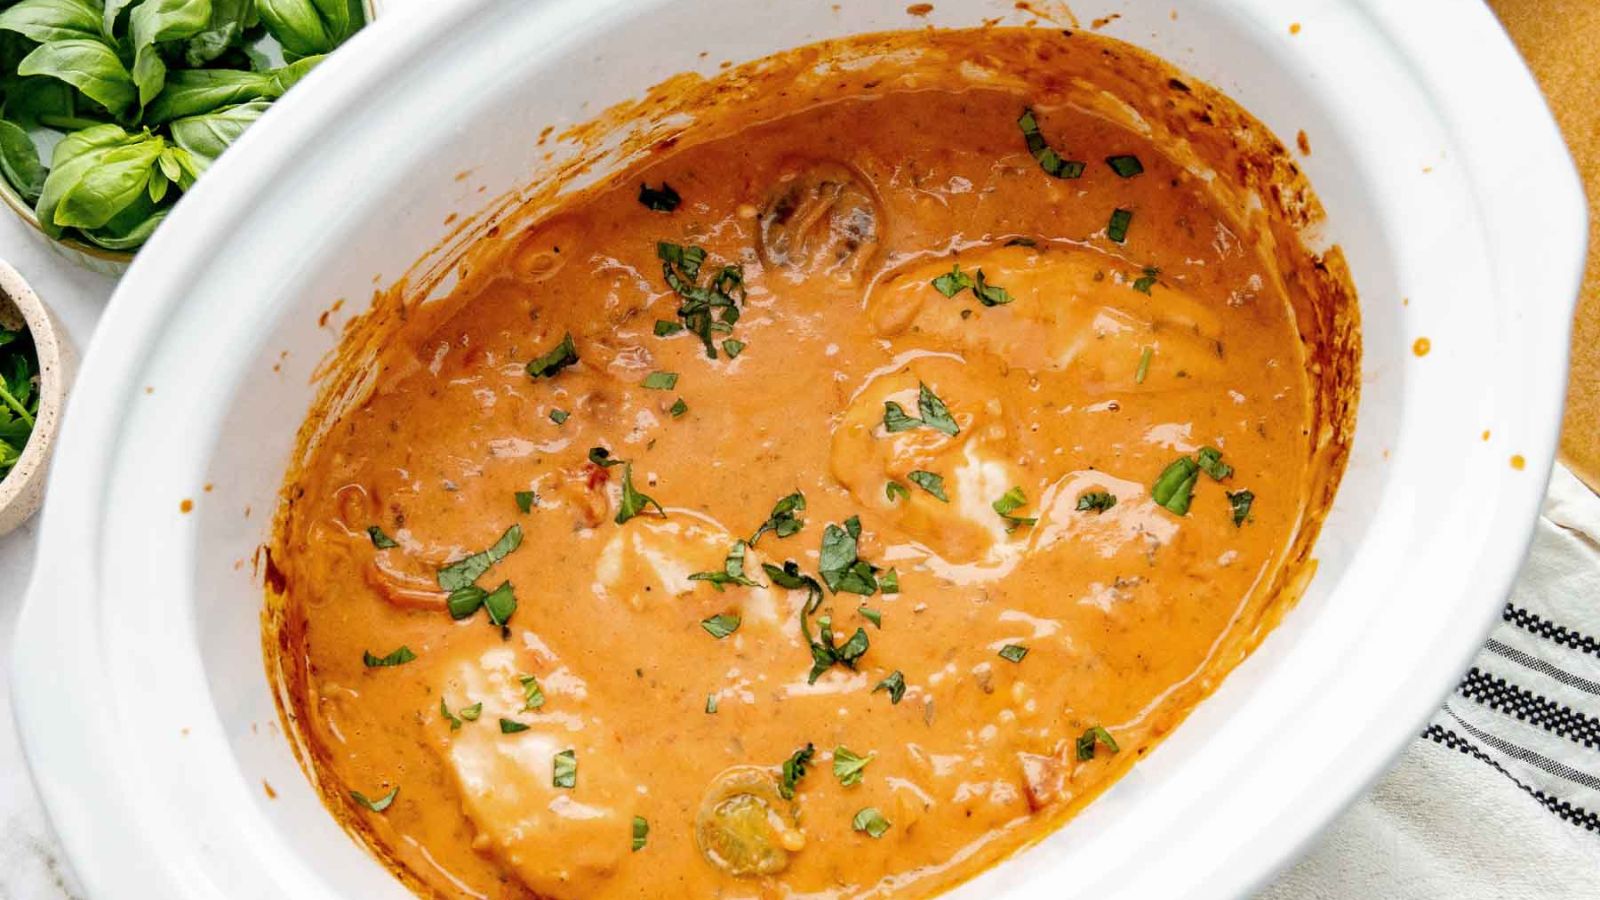 A slow cooker full of a pink, creamy tomato sauce and fresh basil smothering chicken.